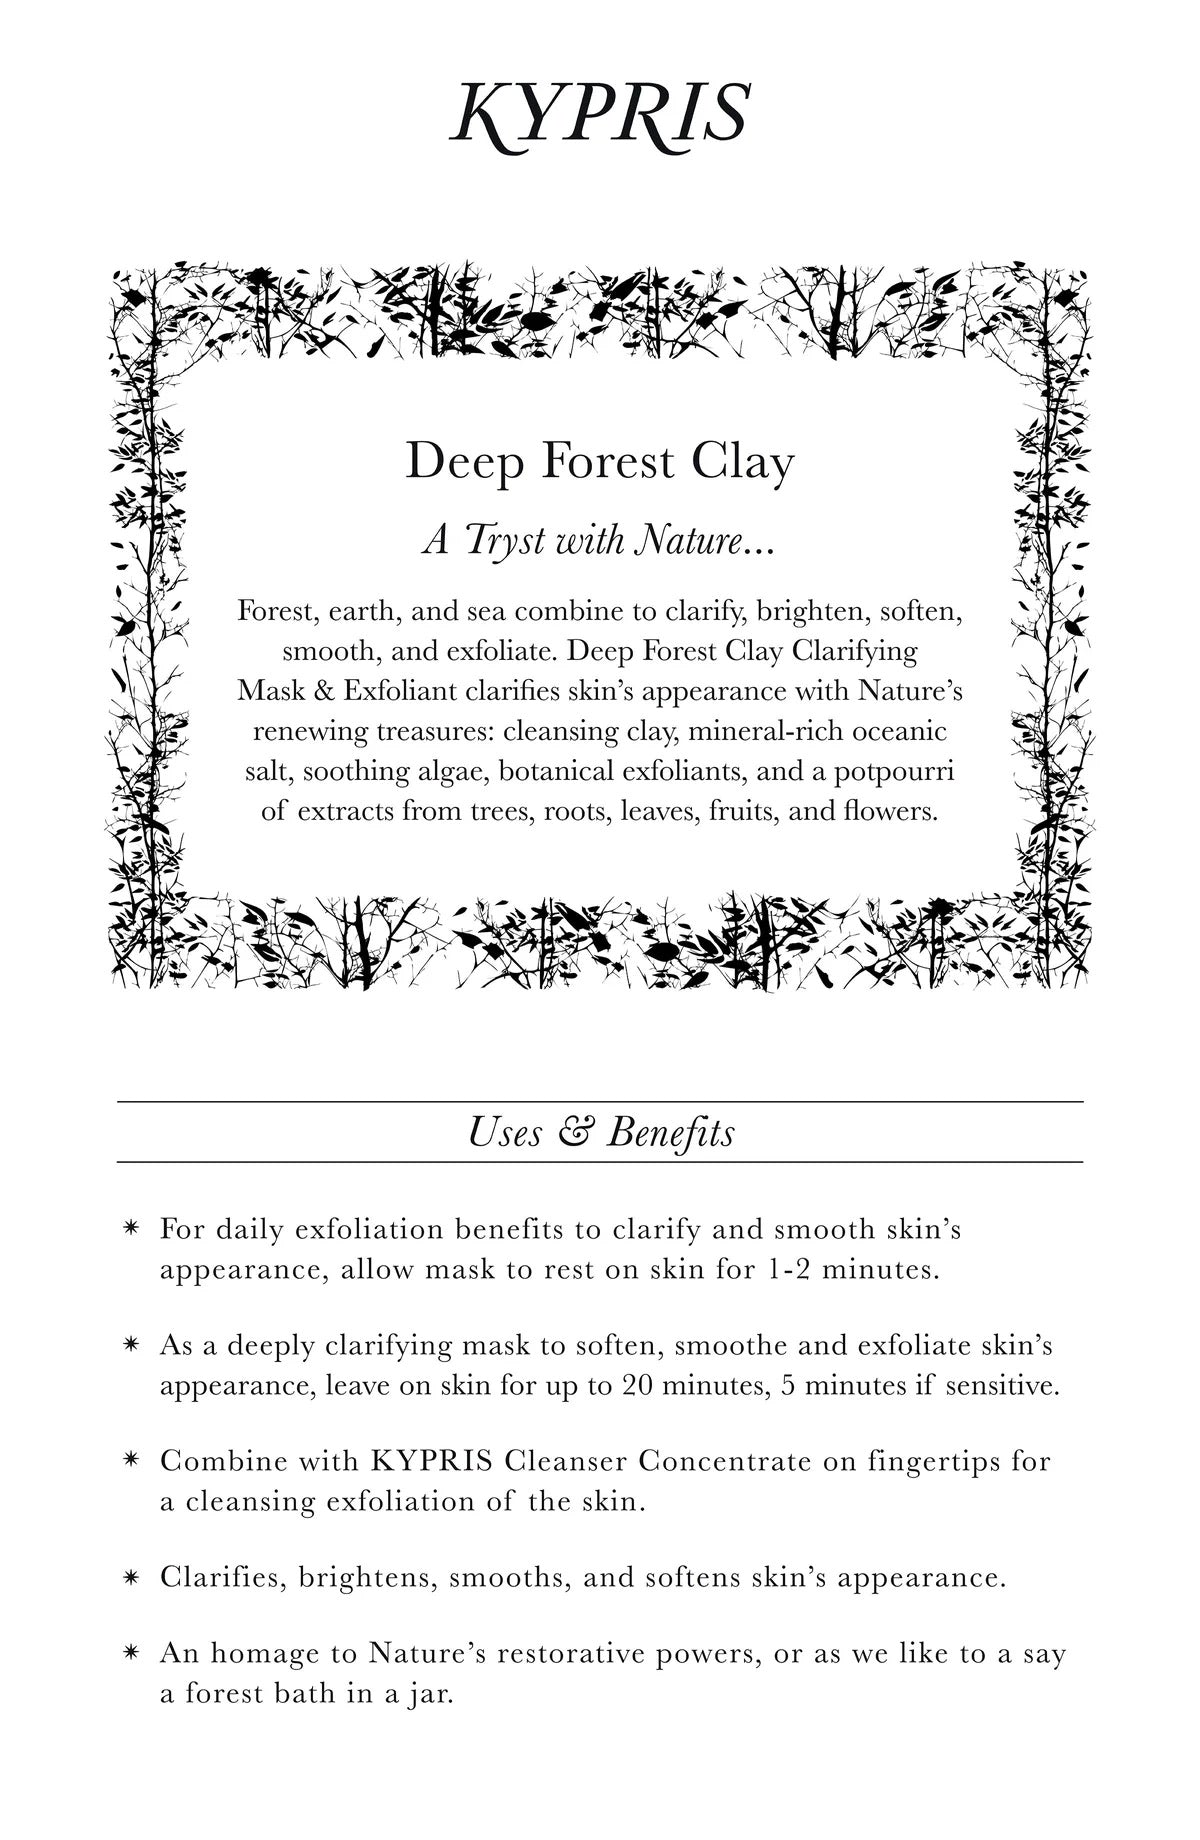 Kypris Deep Forest Clay Information